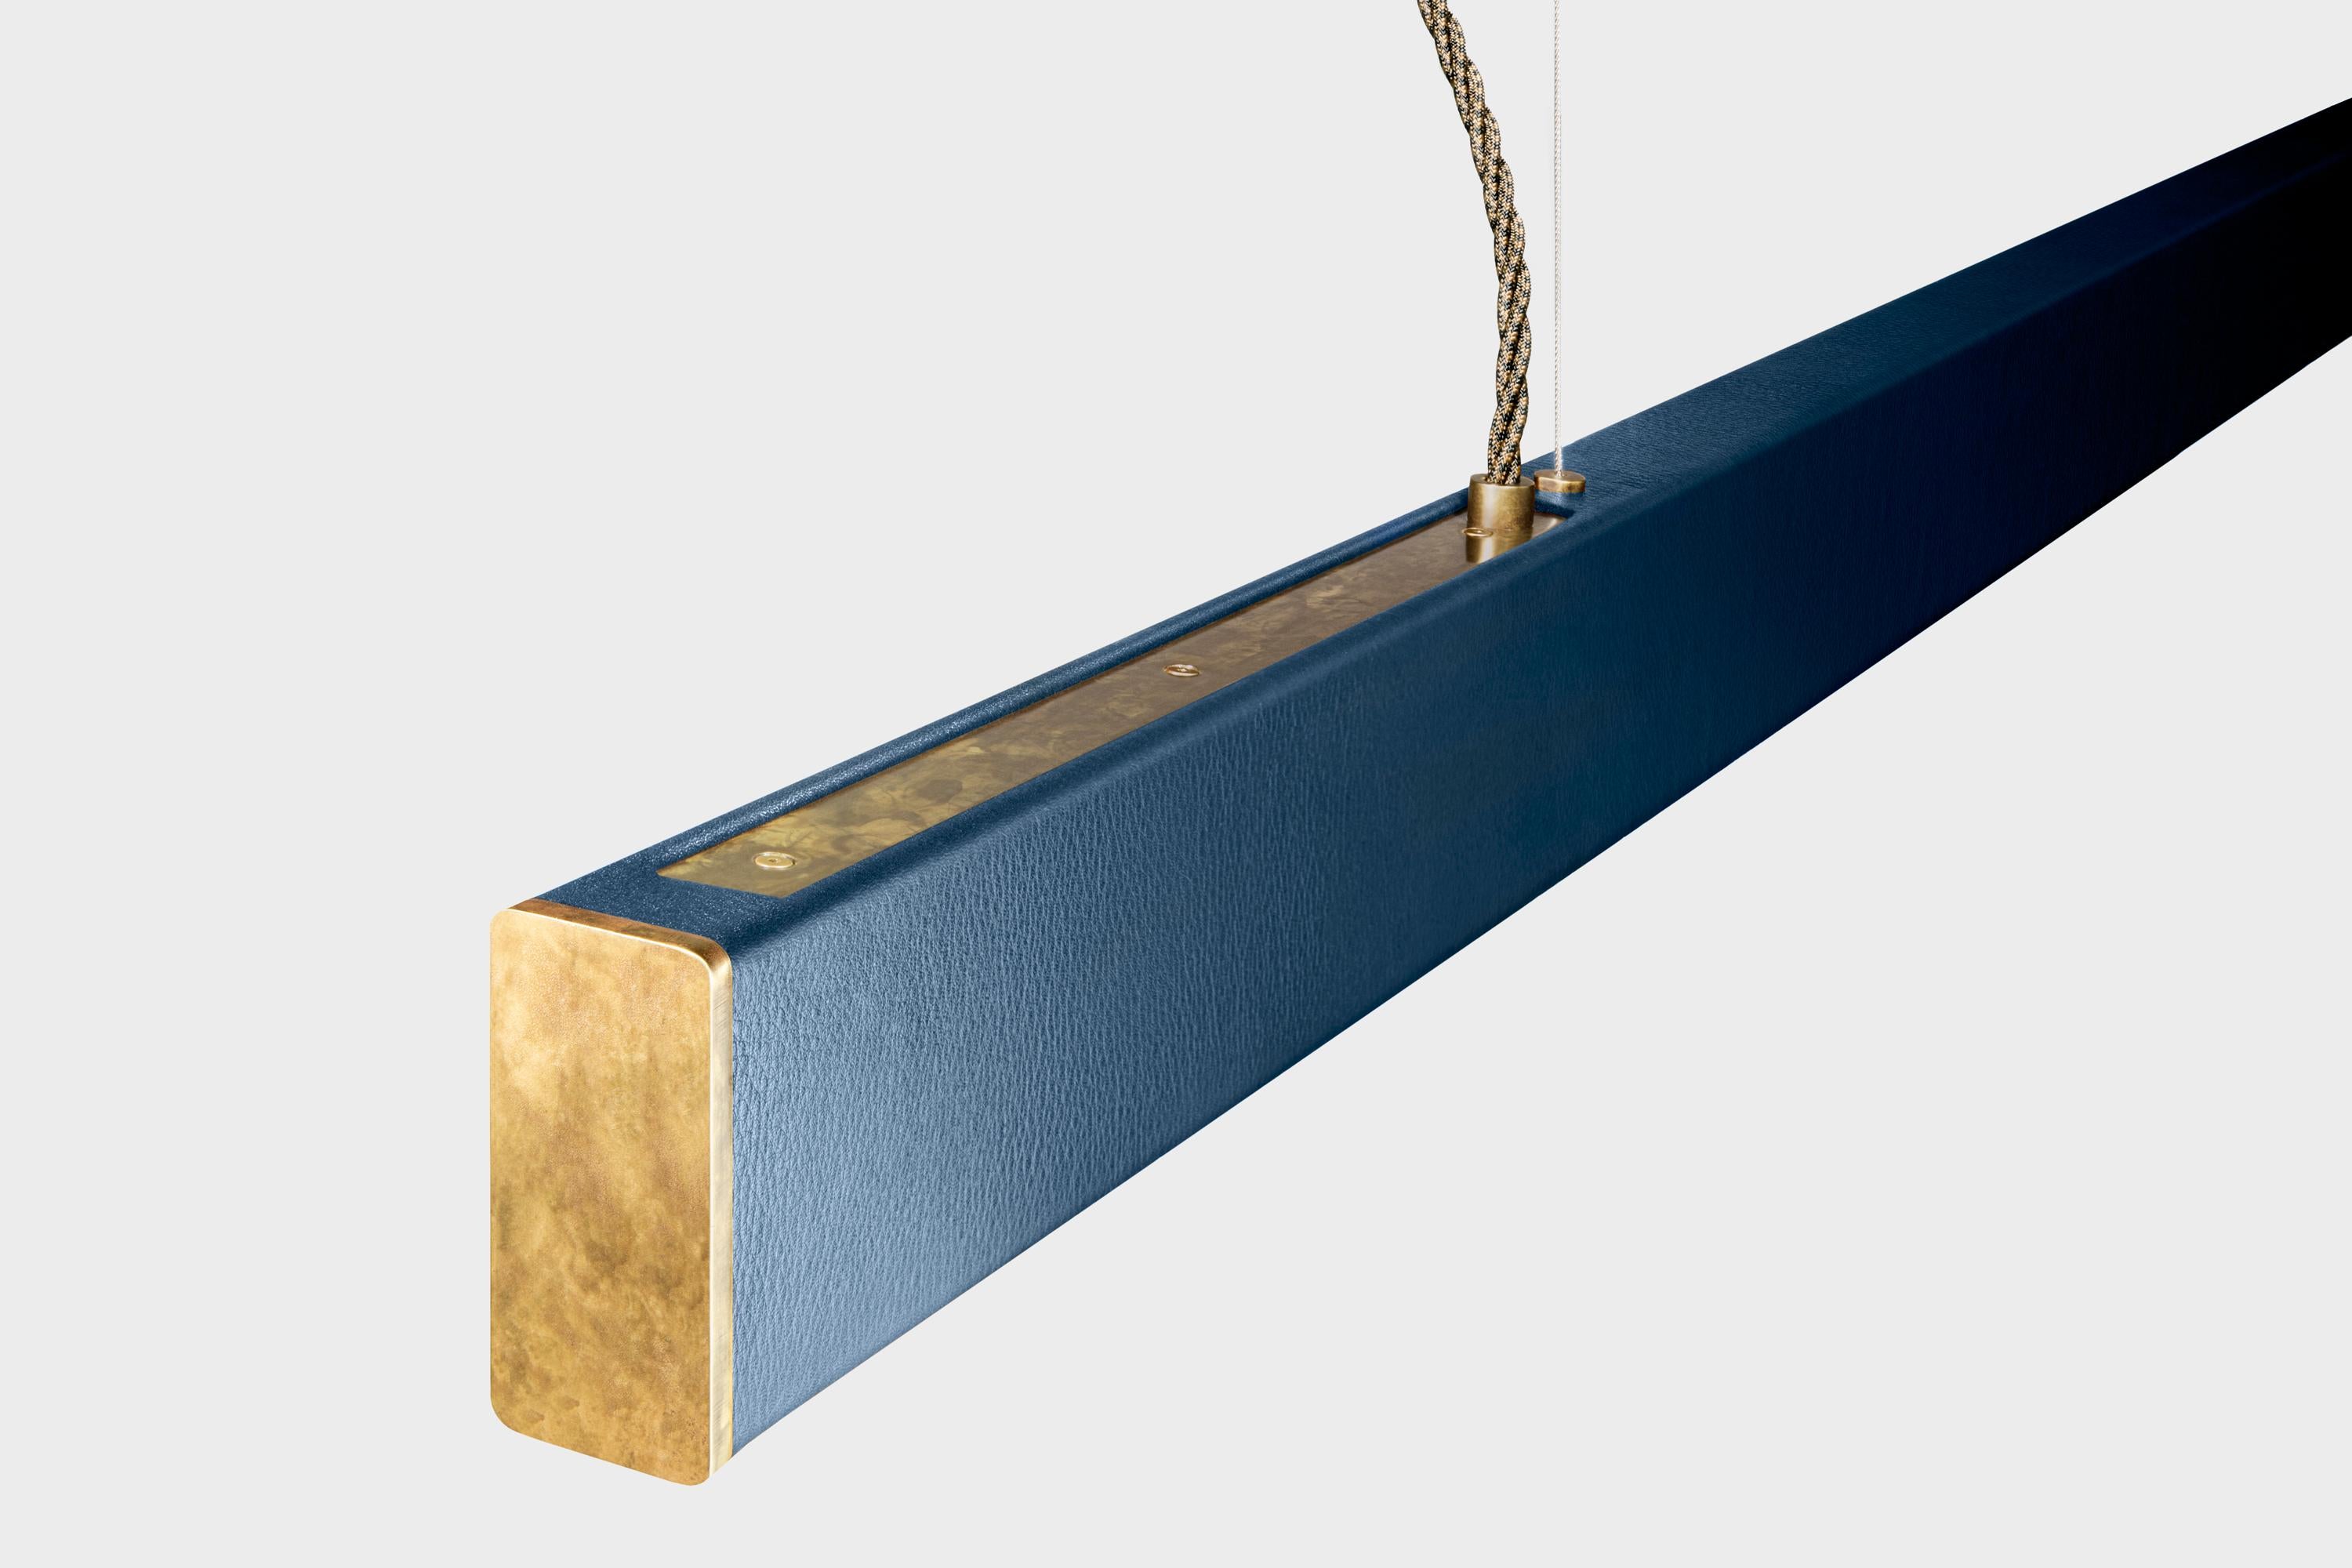 Remaining true to its roots while embracing new materials, the Leather 2x4 is a reimagining of our signature 2x4 Pendant. The classic metal hardware is accentuated by lush hand cut leather finishes, creating a sophisticated pendant that draws the